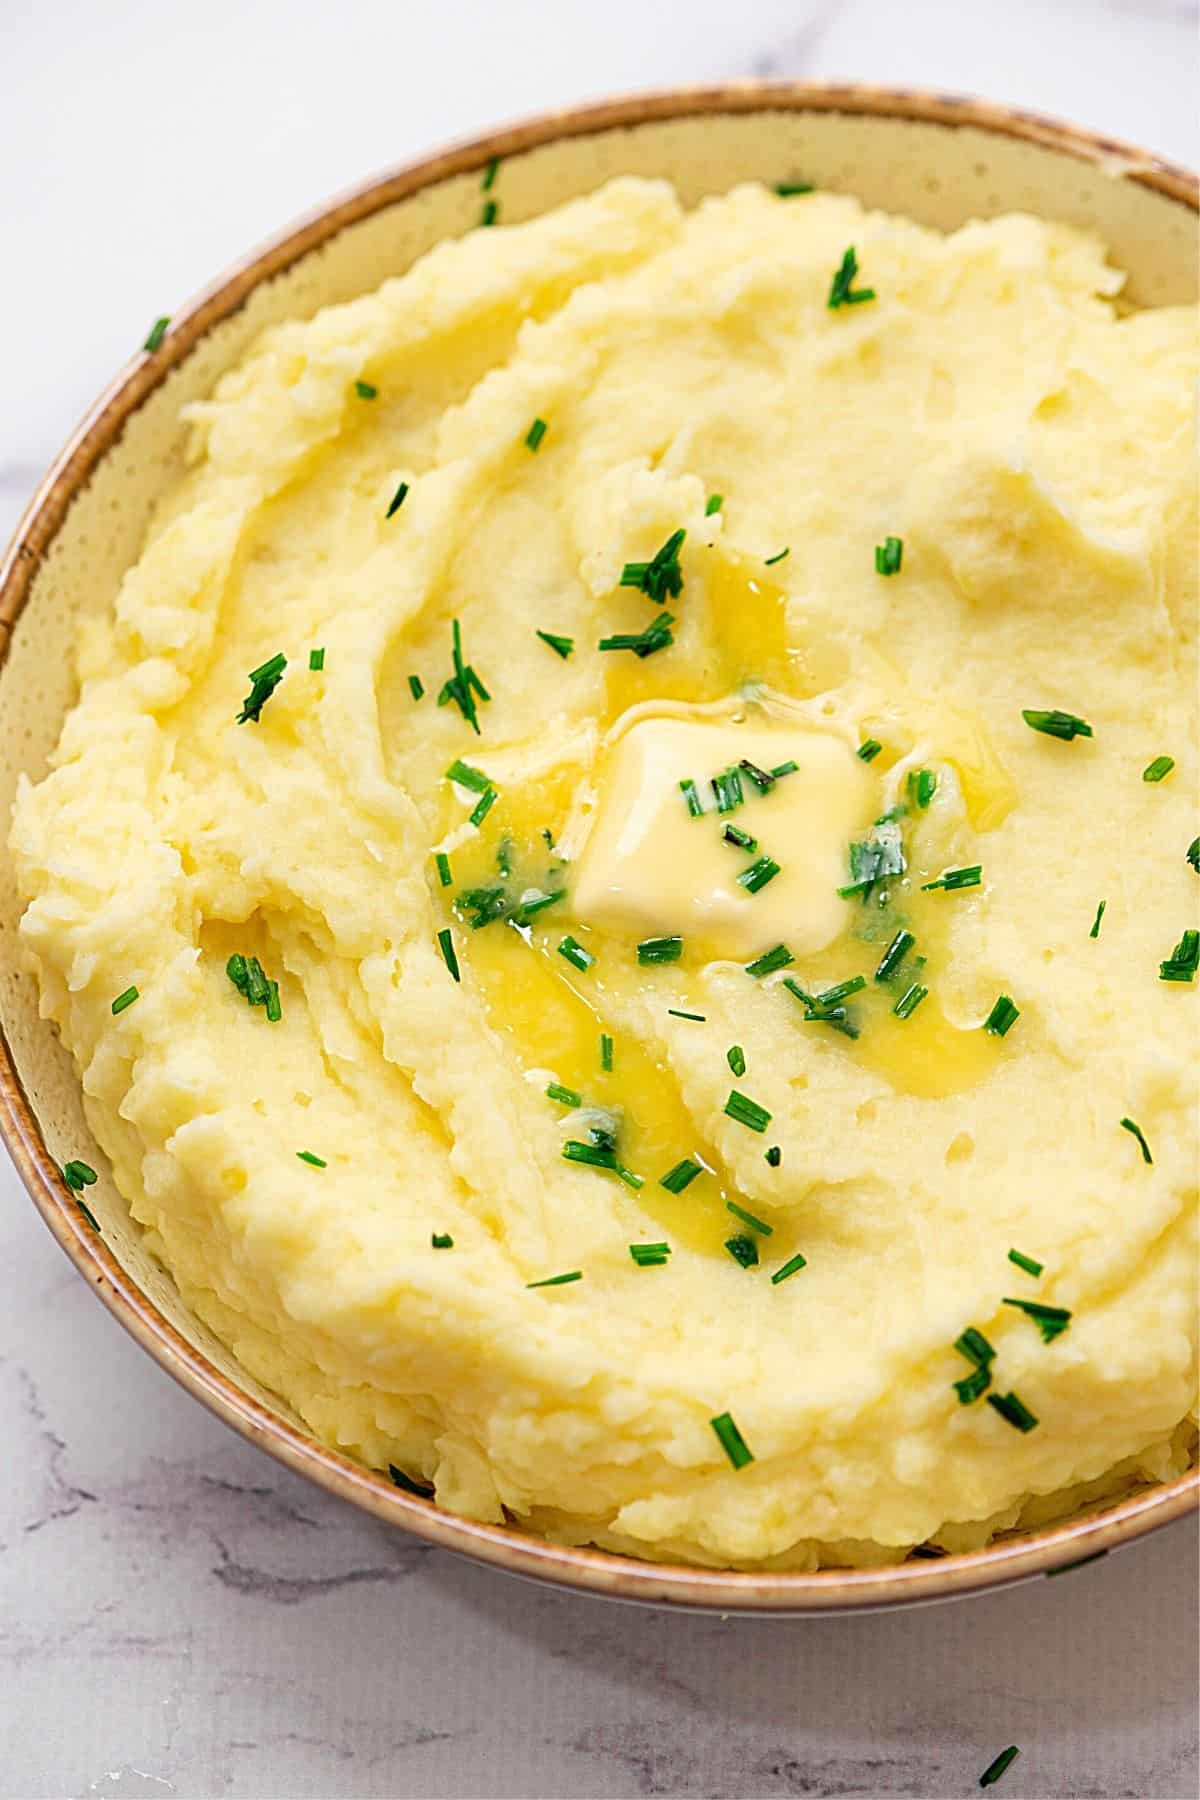 Bowl of Yukon Gold Mashed Potatoes topped with chives.